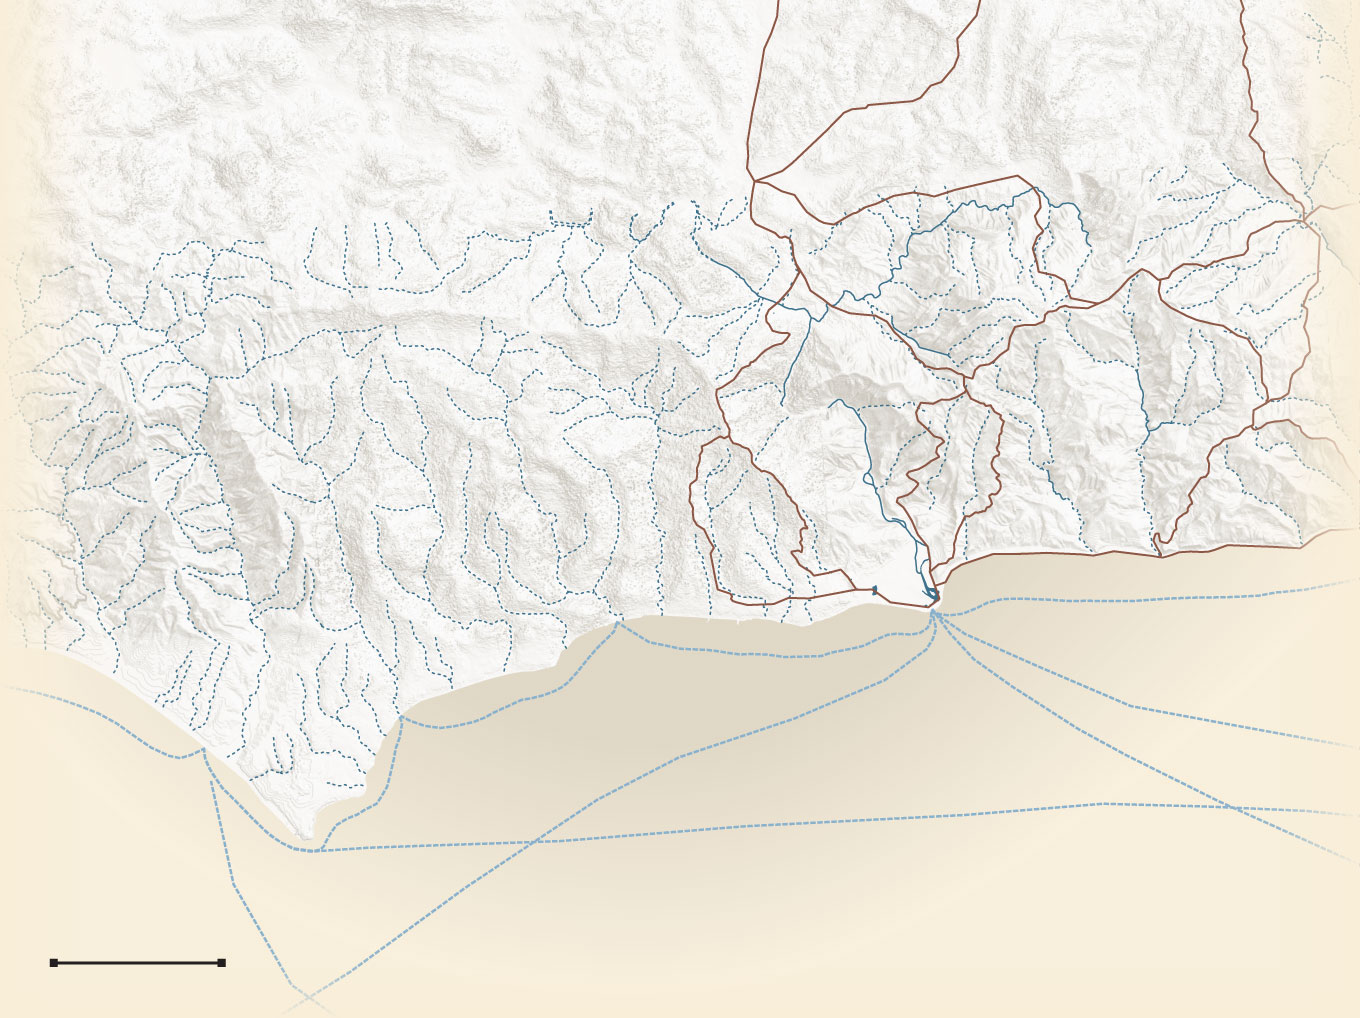 A map shows land and sea routes on the coast of present-day Malibu.